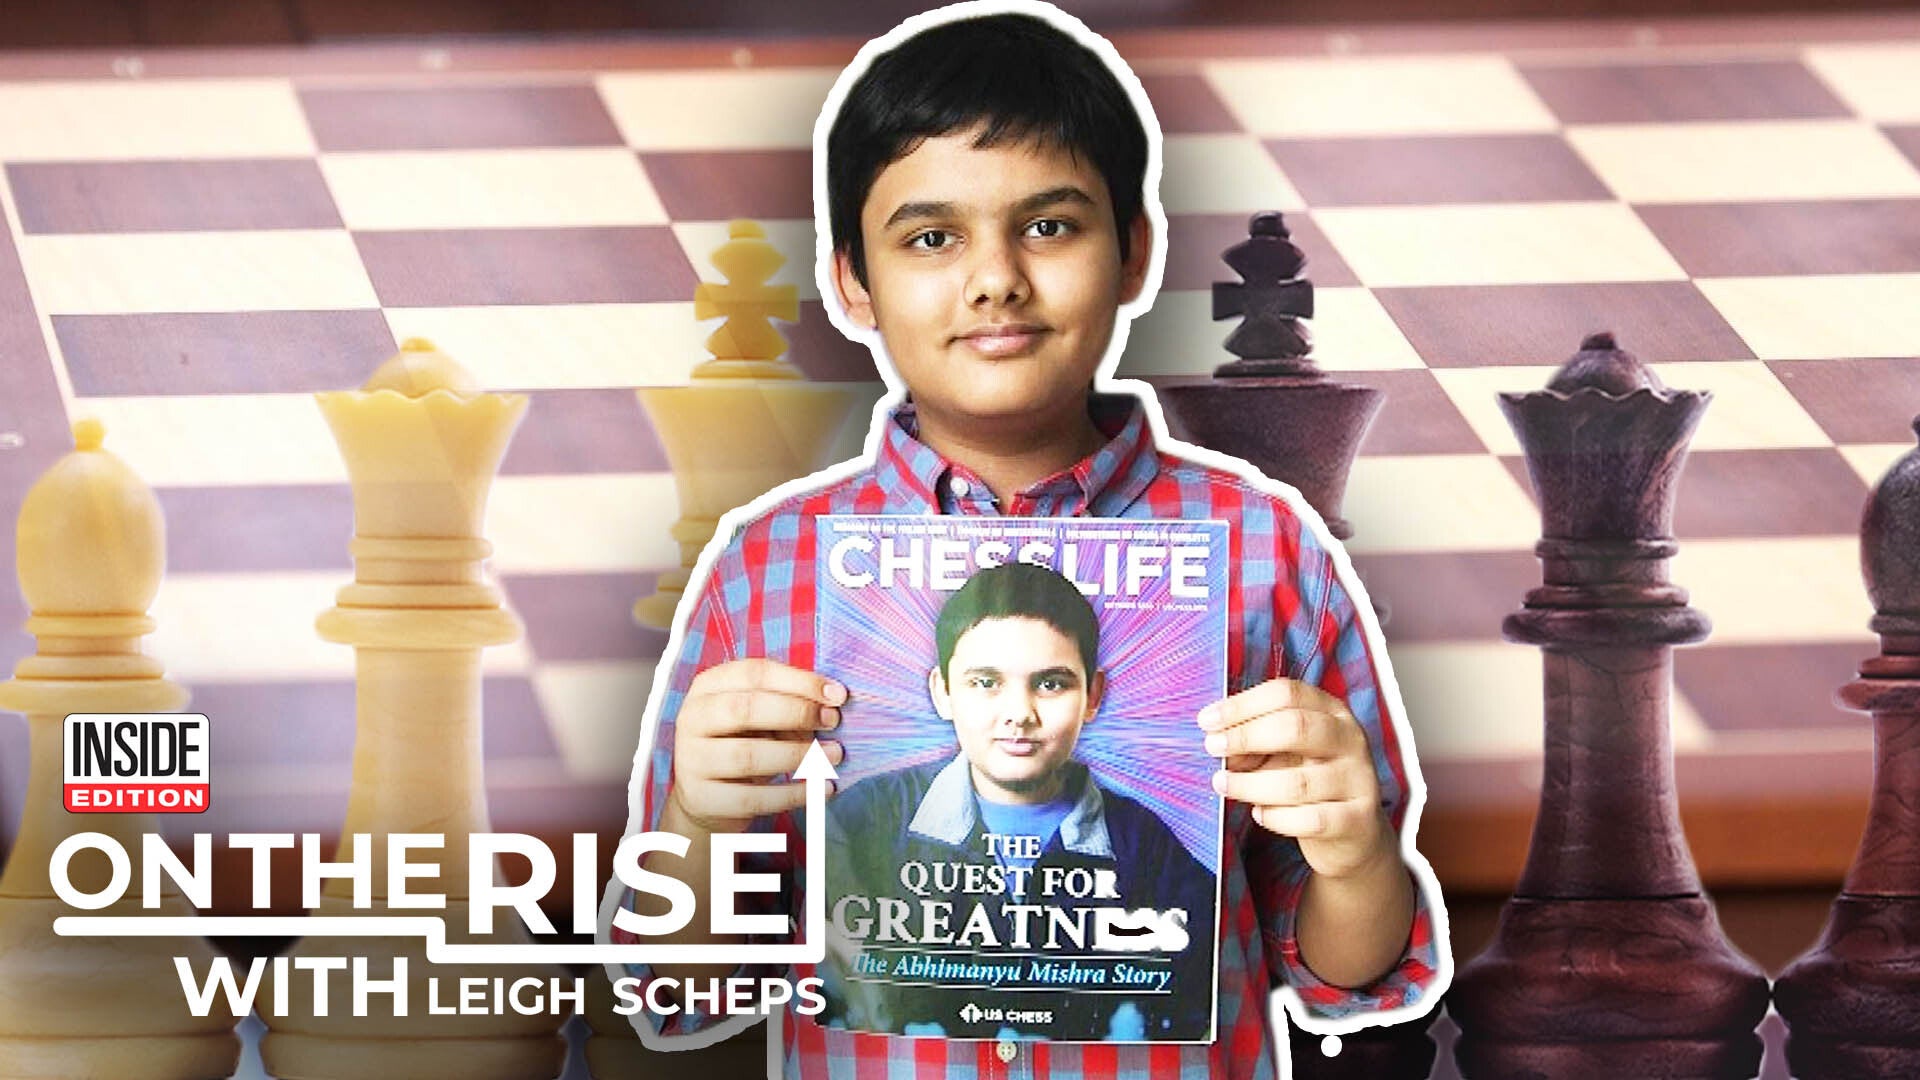 I'm 11 and the Youngest Chess Master in the 2021 U.S. Junior Championships